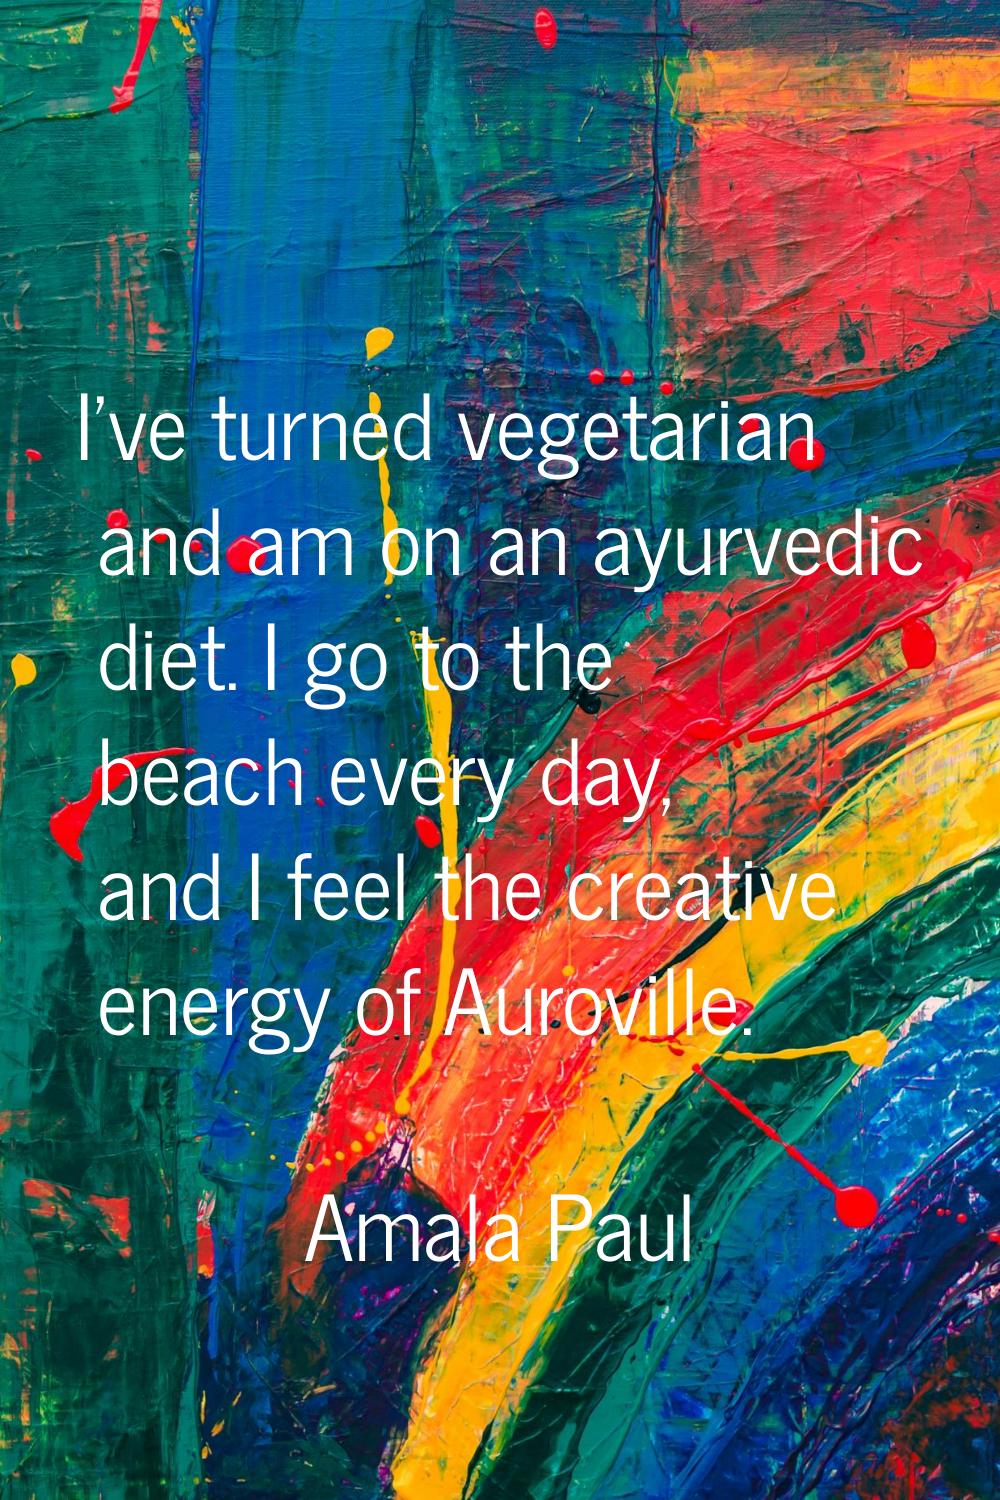 I've turned vegetarian and am on an ayurvedic diet. I go to the beach every day, and I feel the cre